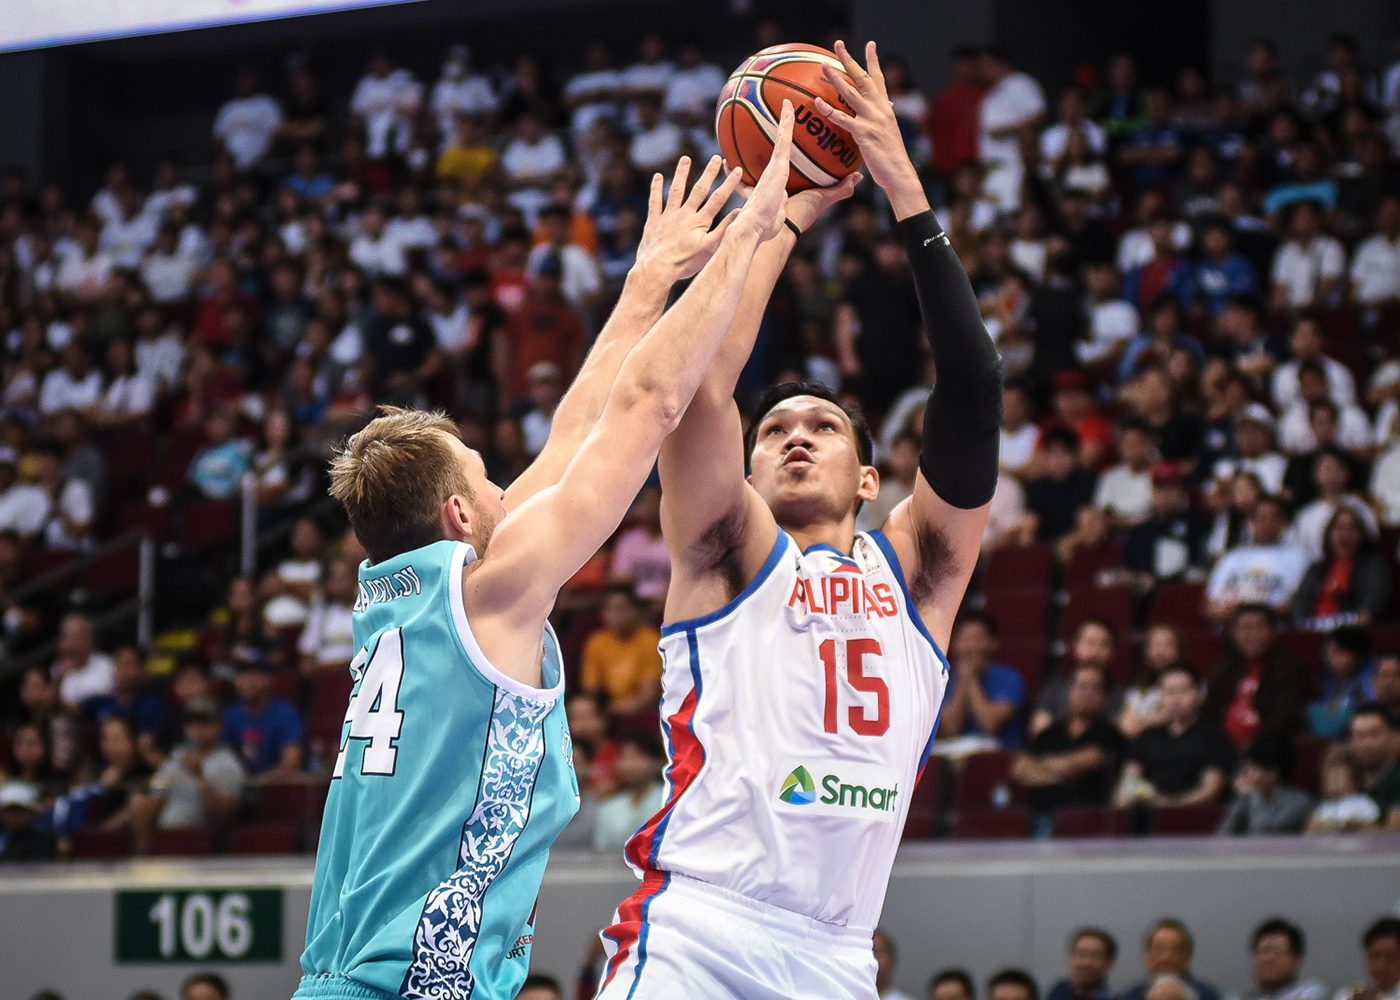 After Kazakh loss, Gilas can’t carry negativity to crucial Iran game